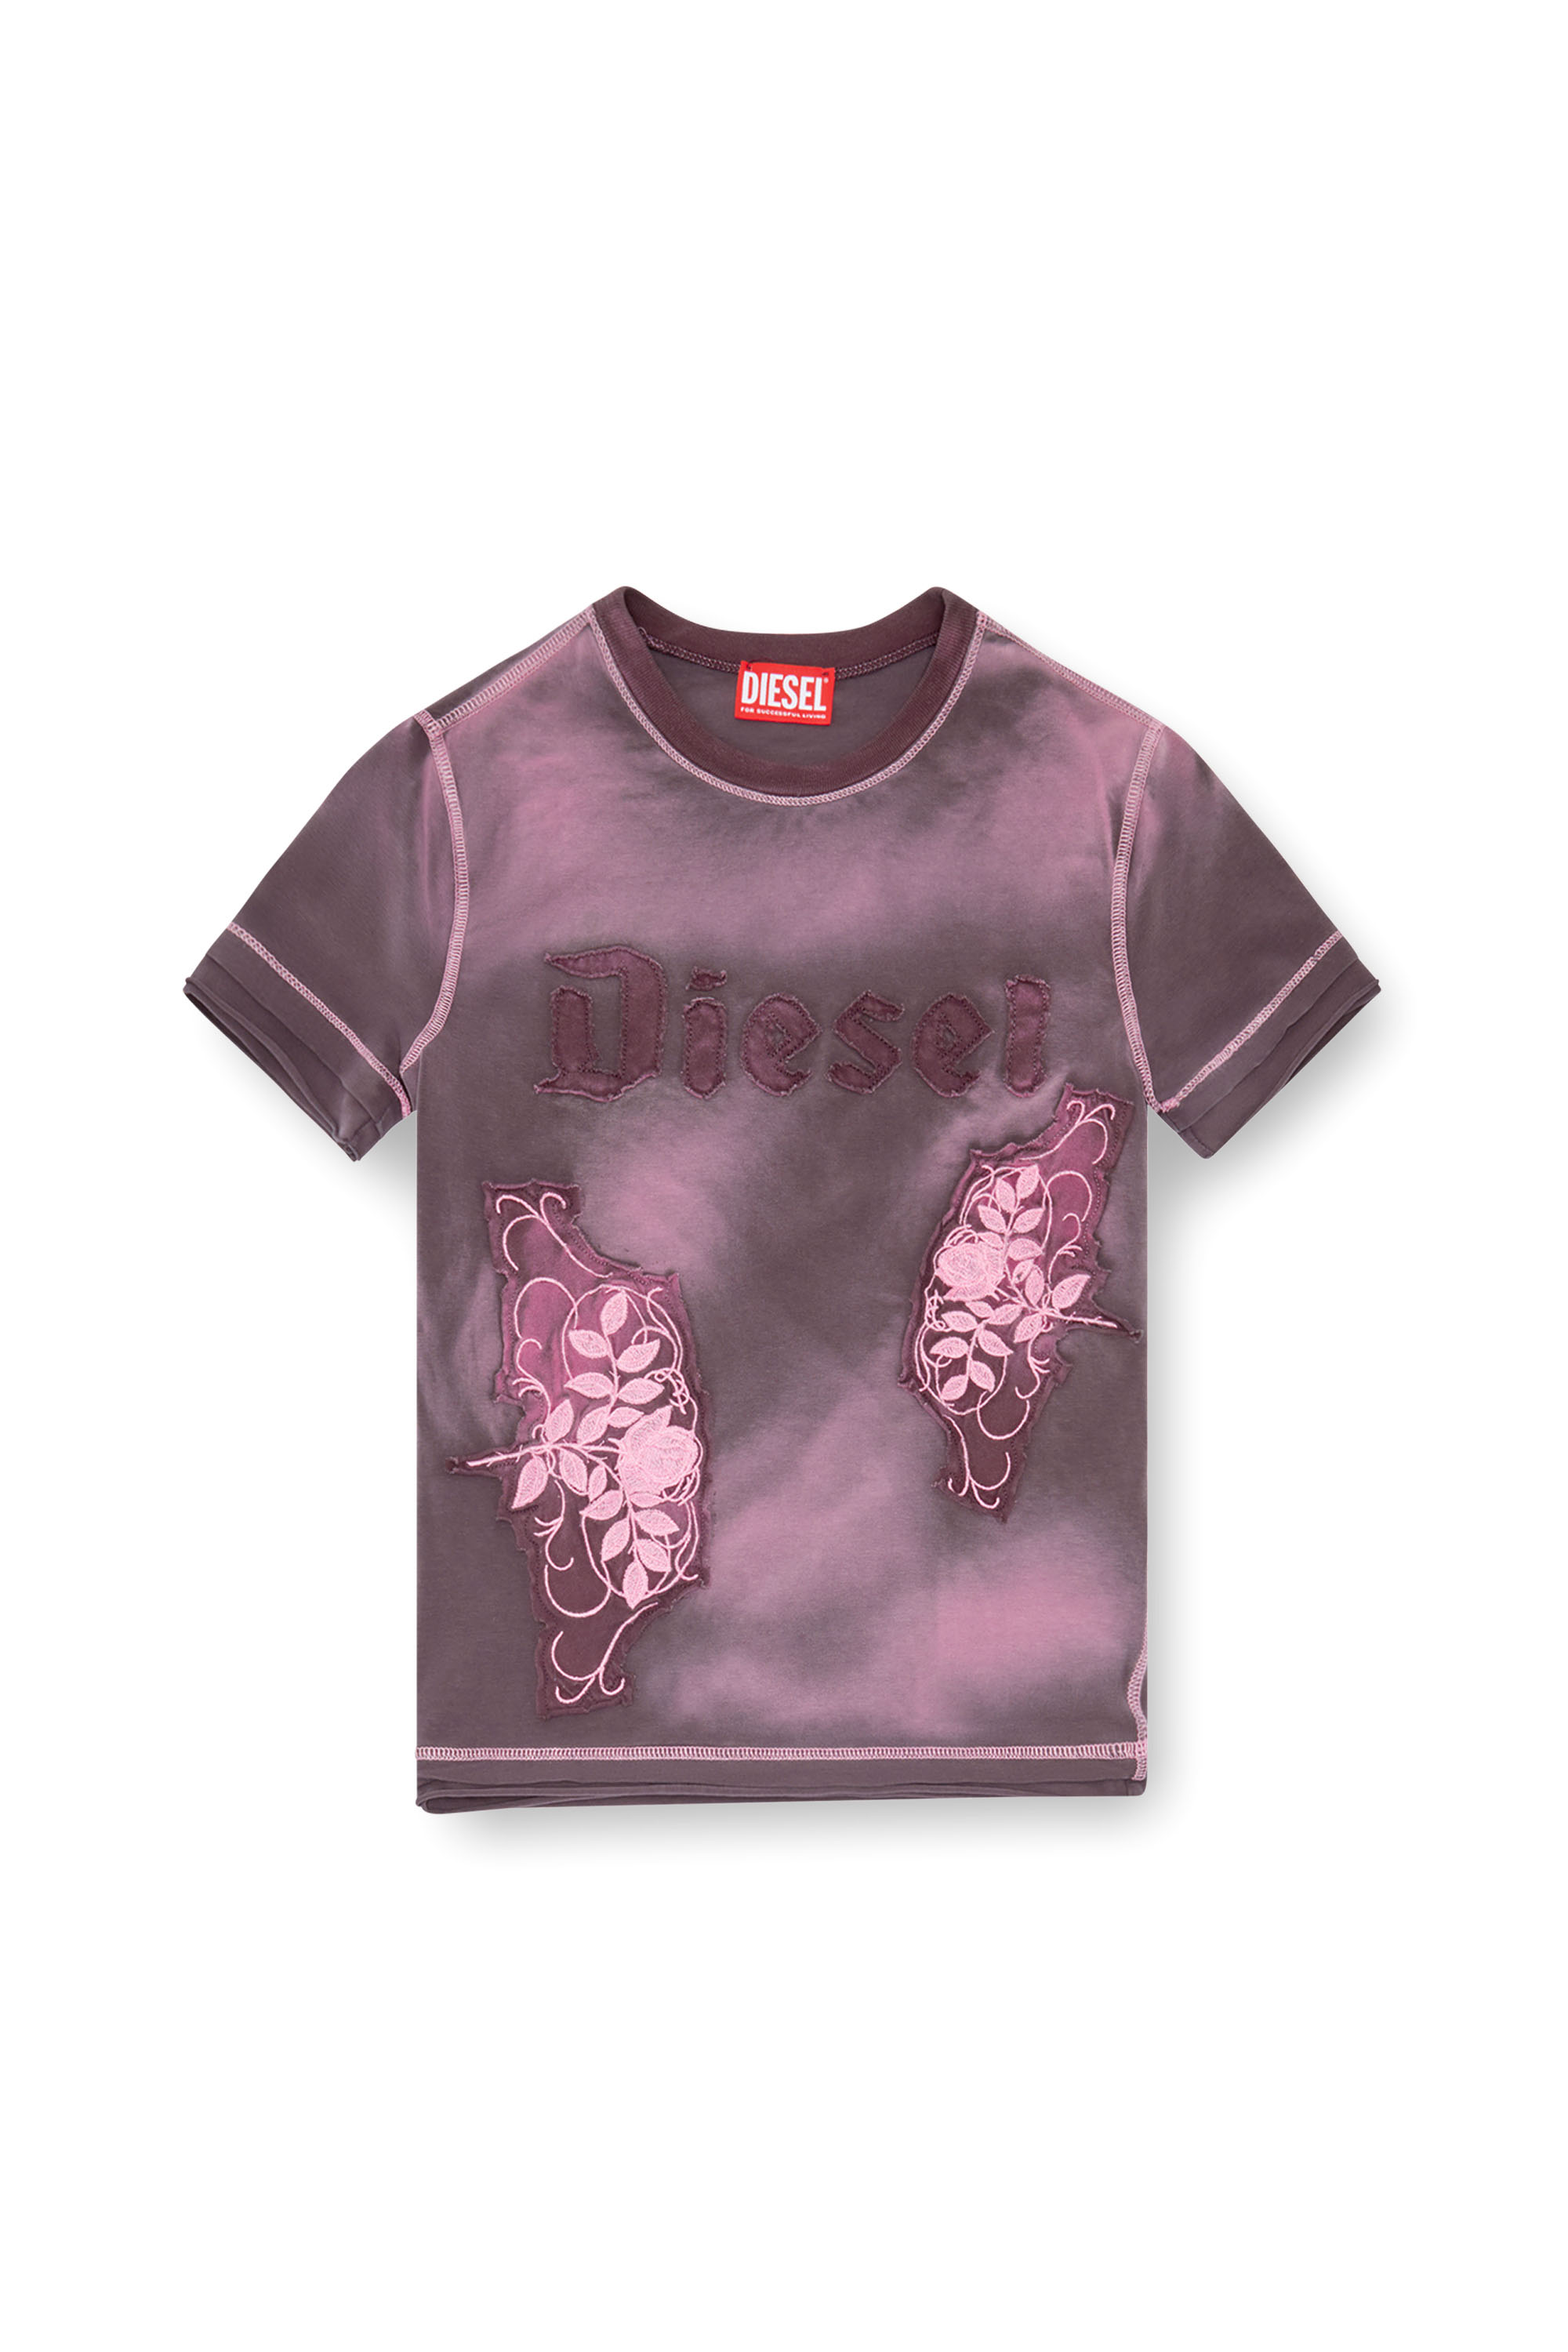 Diesel - T-UNCUT, Woman T-shirt with embroidered floral patches in Violet - Image 3